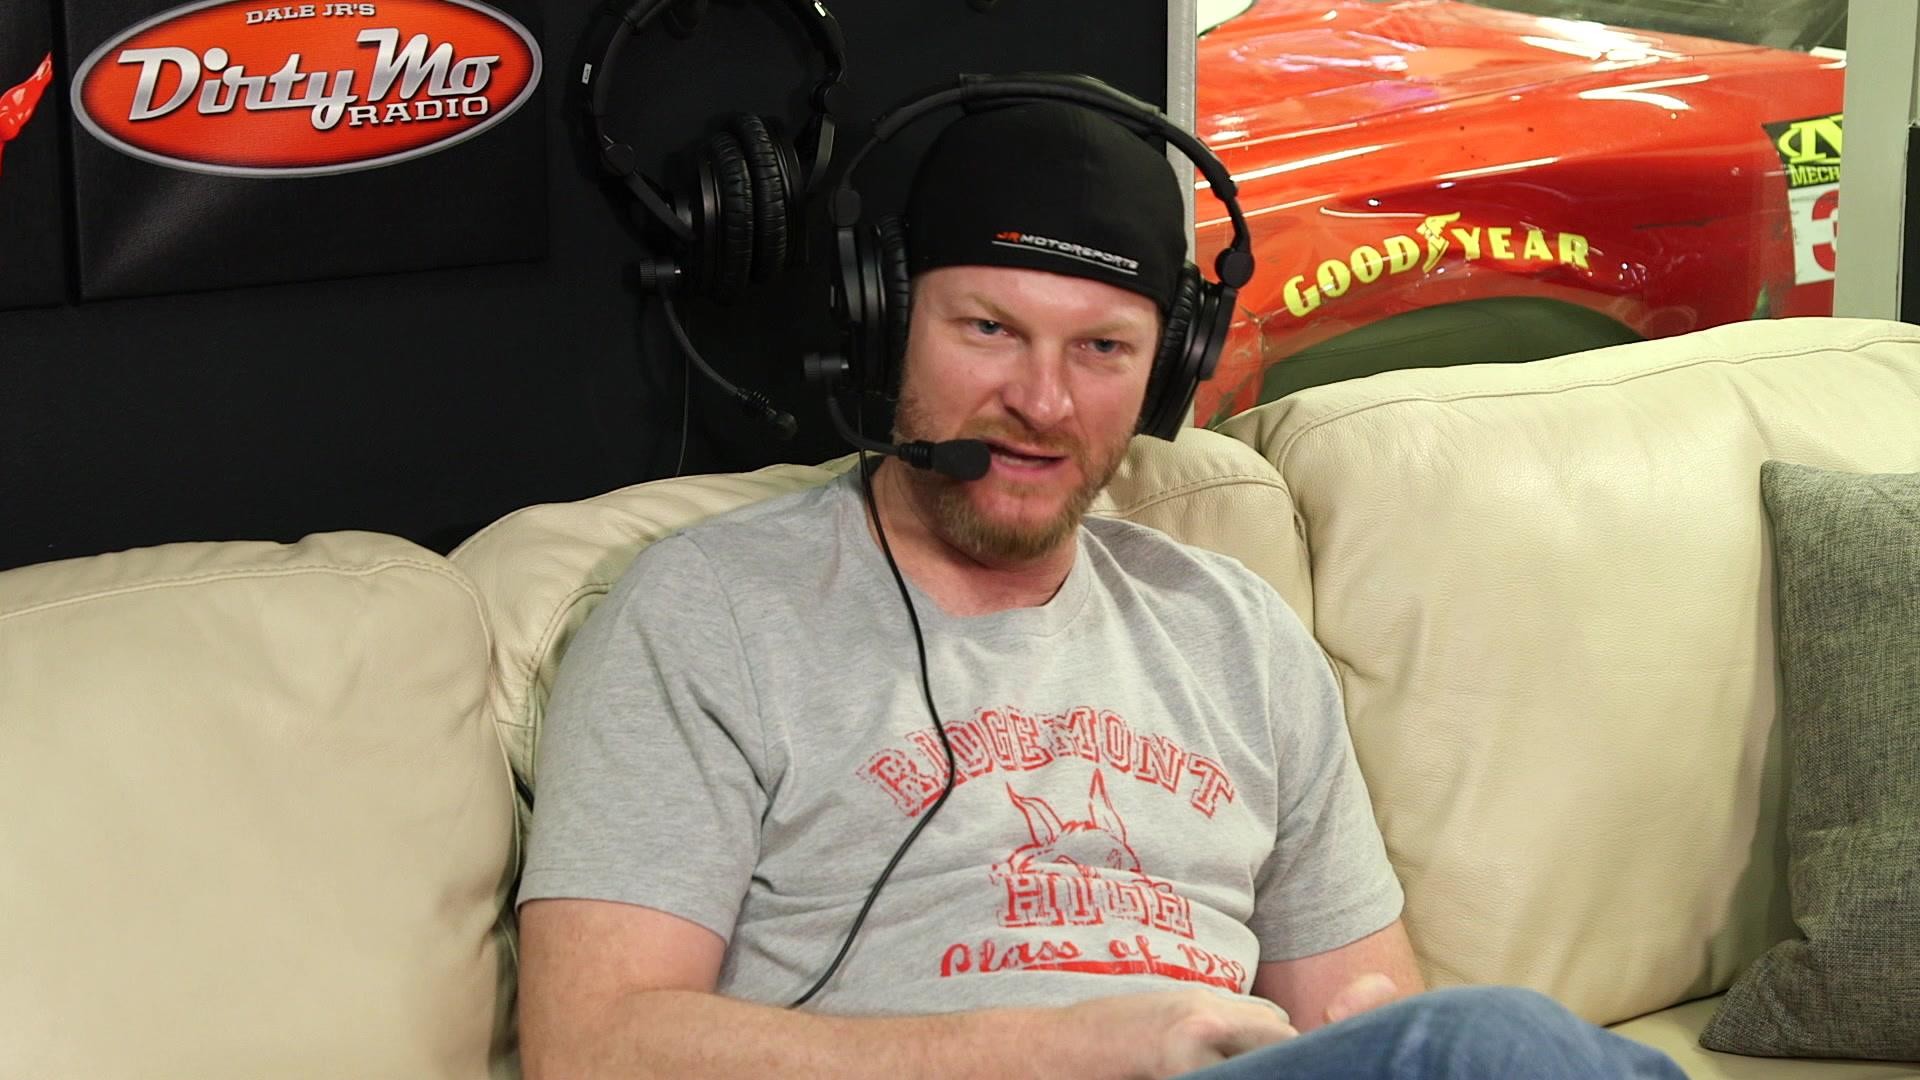 1920x1080 Dale Earnhardt Jr. tells story of asking Jimmy Fallon to bless his baby |  NBC Sports